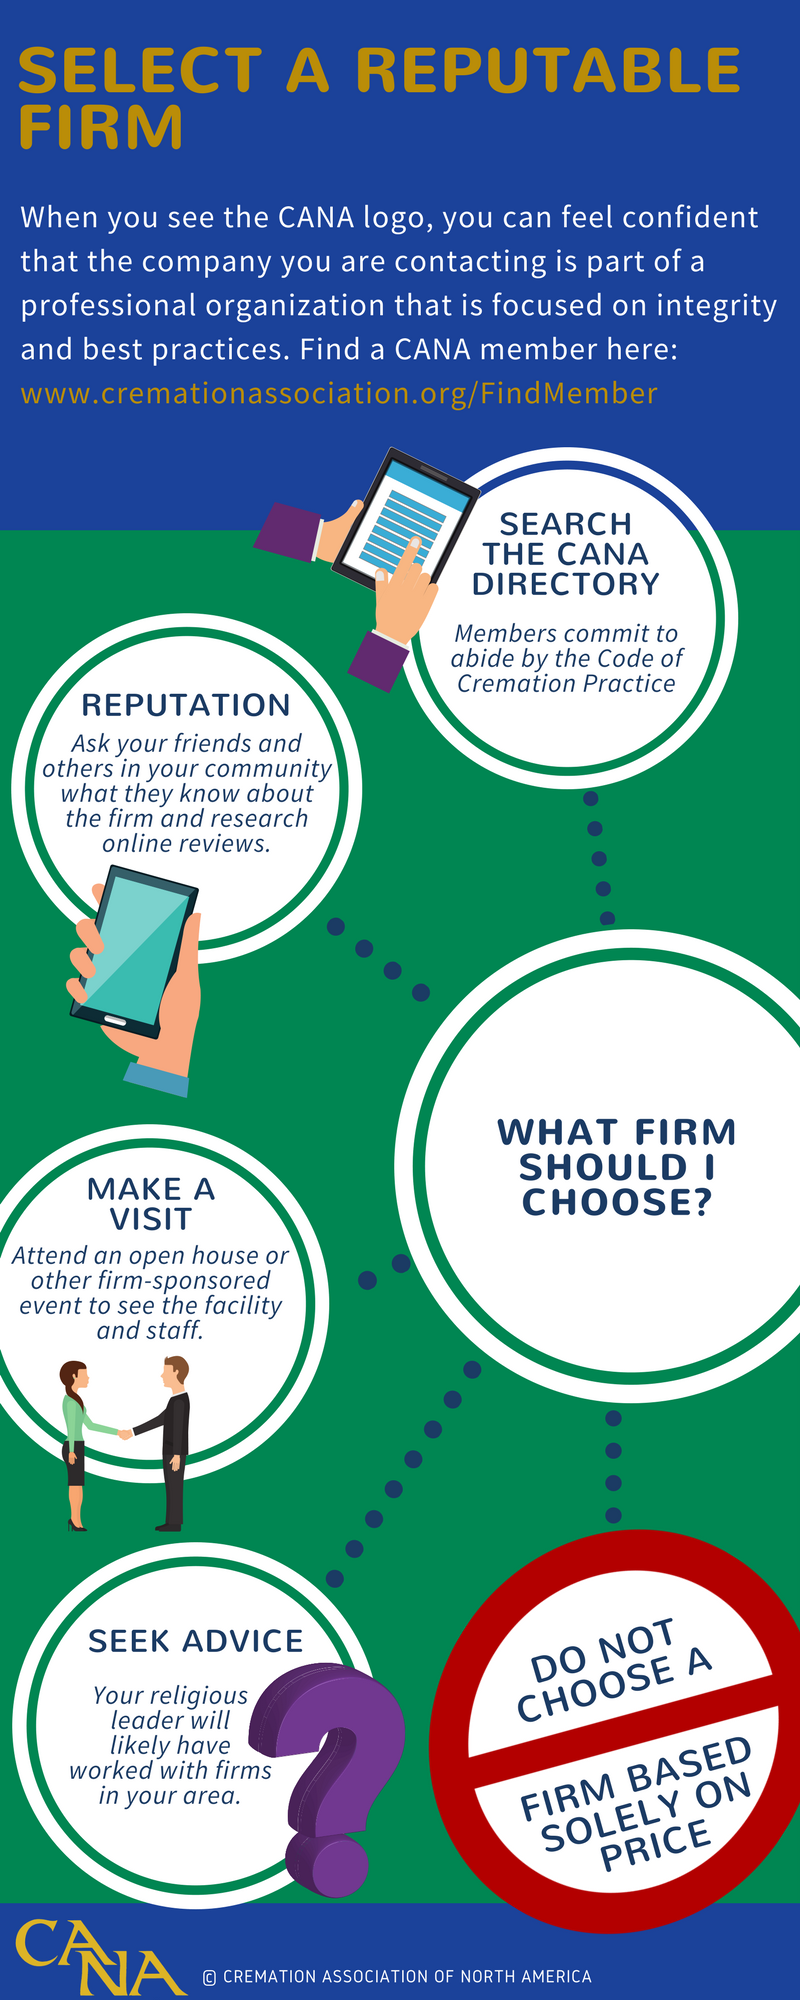 How to choose a reputable firm infographic